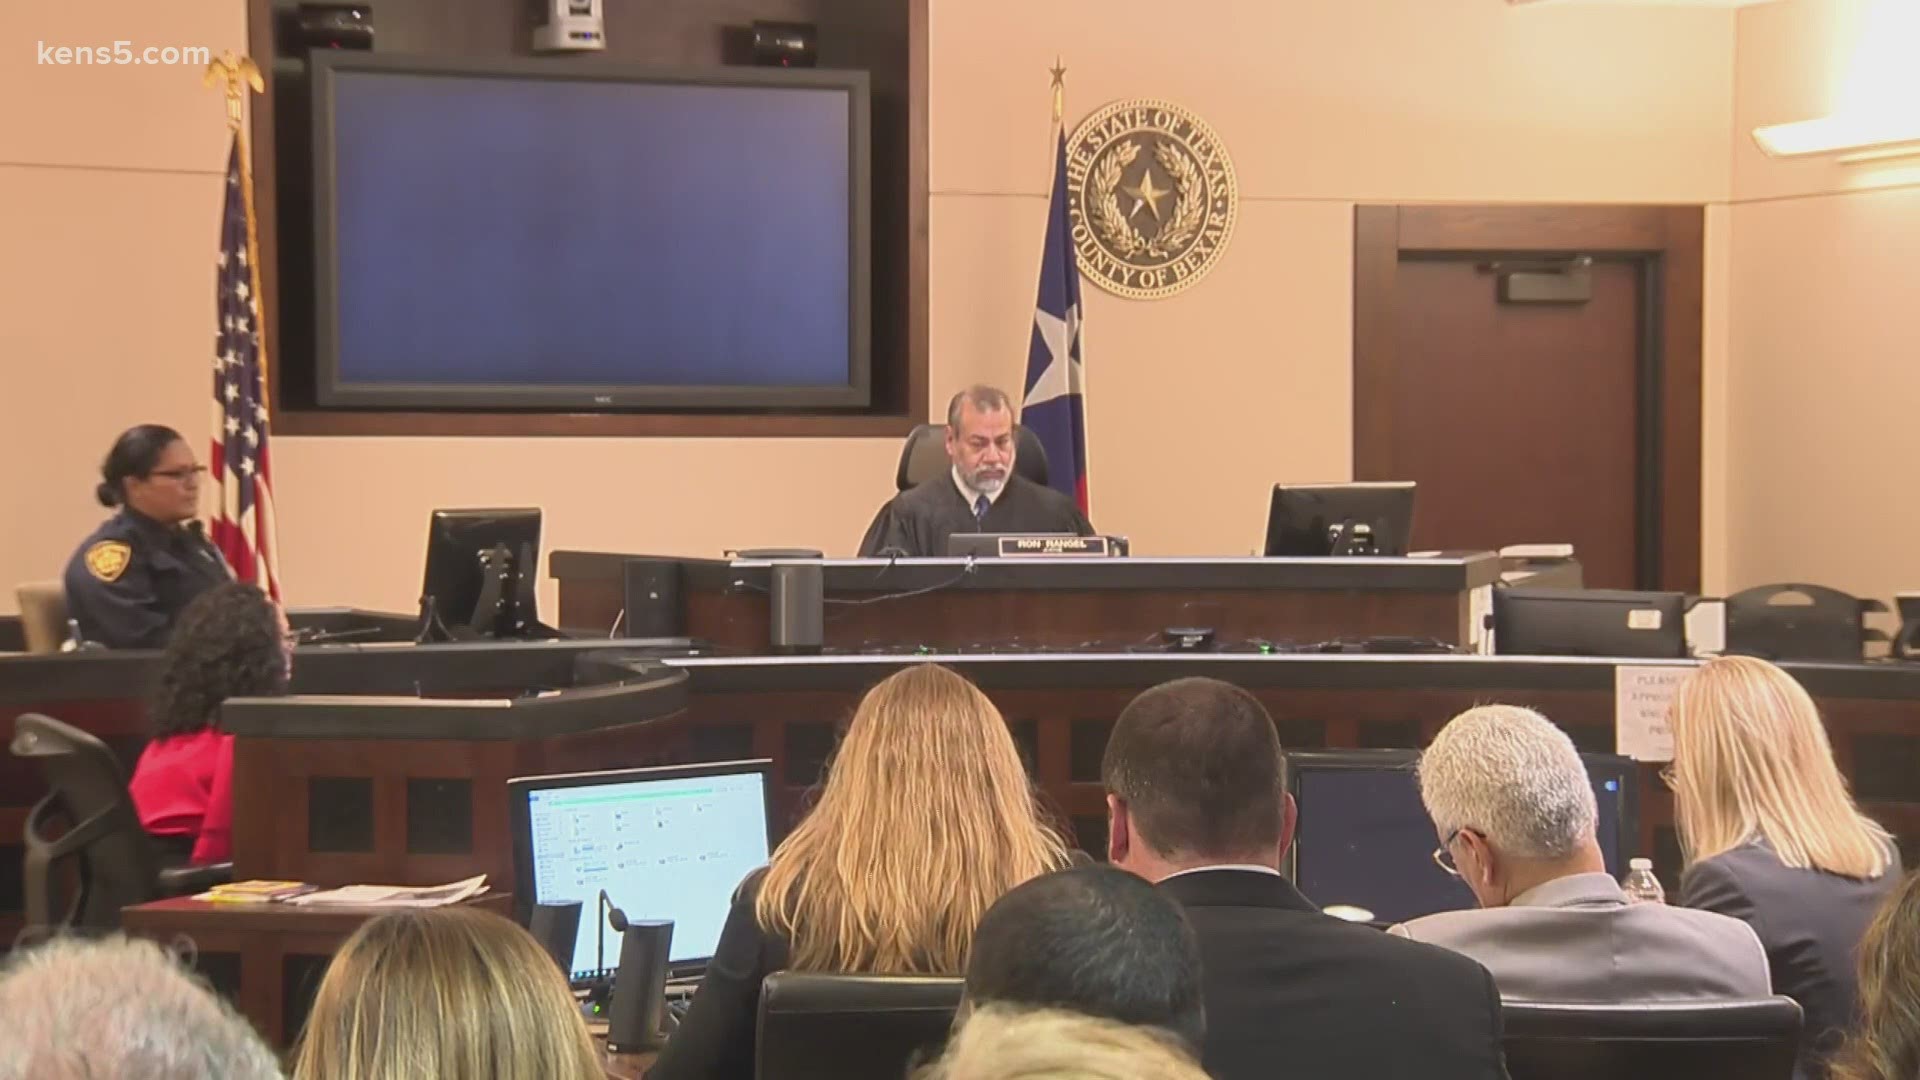 Day four of the trial introduced testimony from multiple San Antonio police officers who described their accounts of responding to alerts of an “officer down."